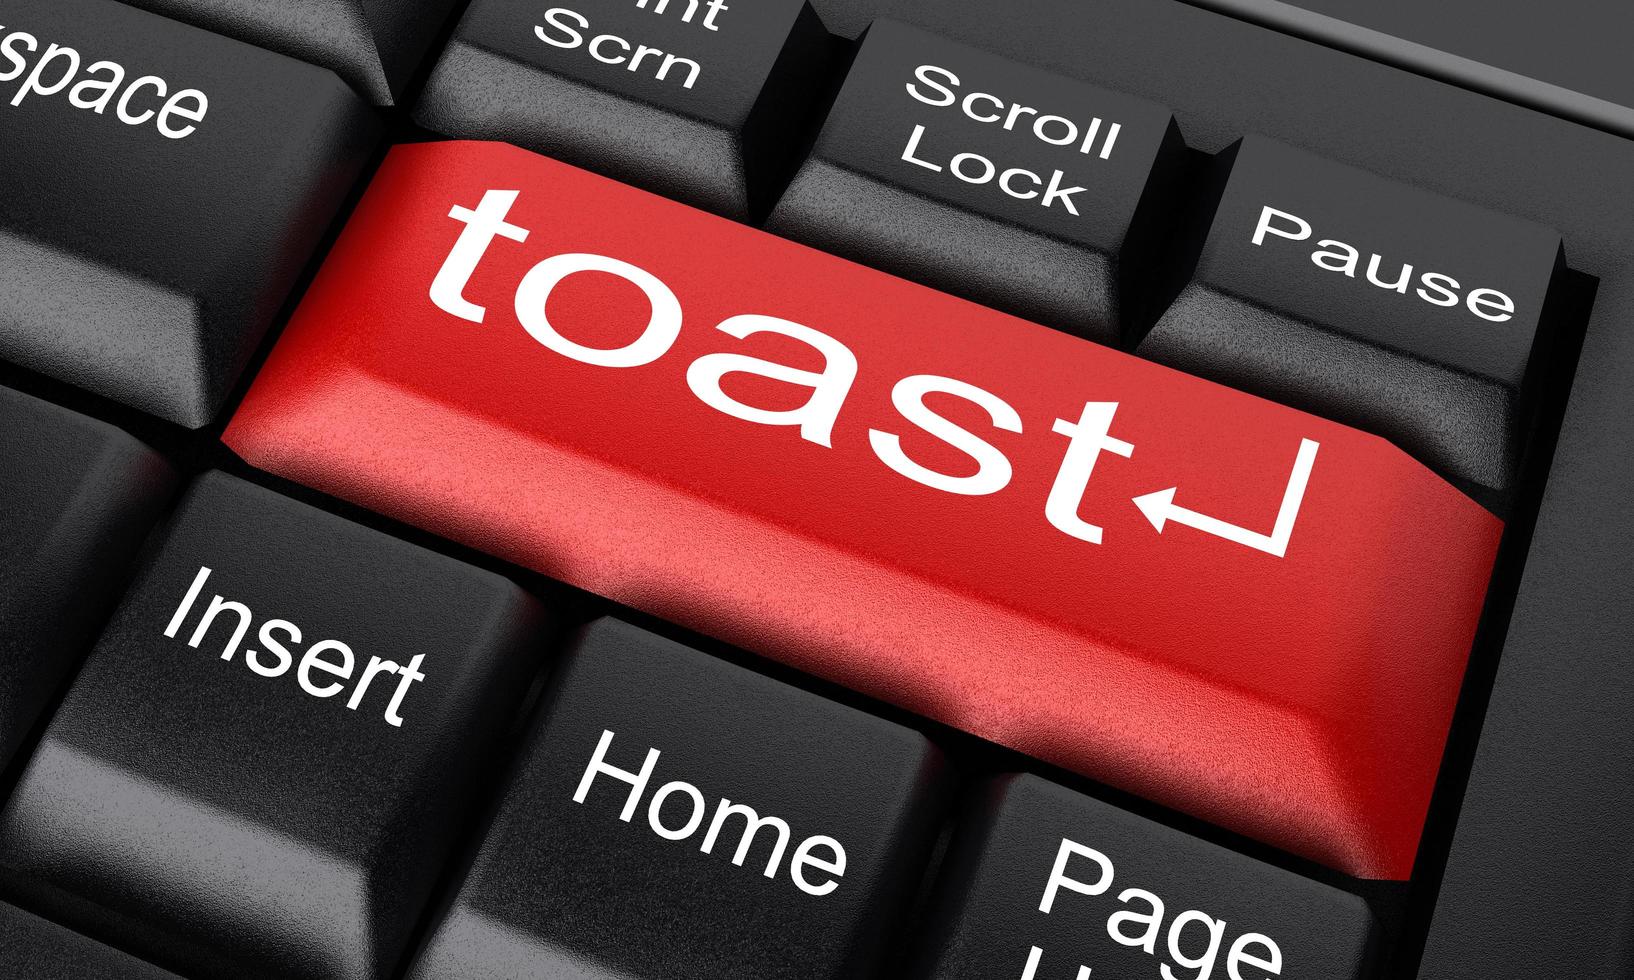 toast word on red keyboard button photo